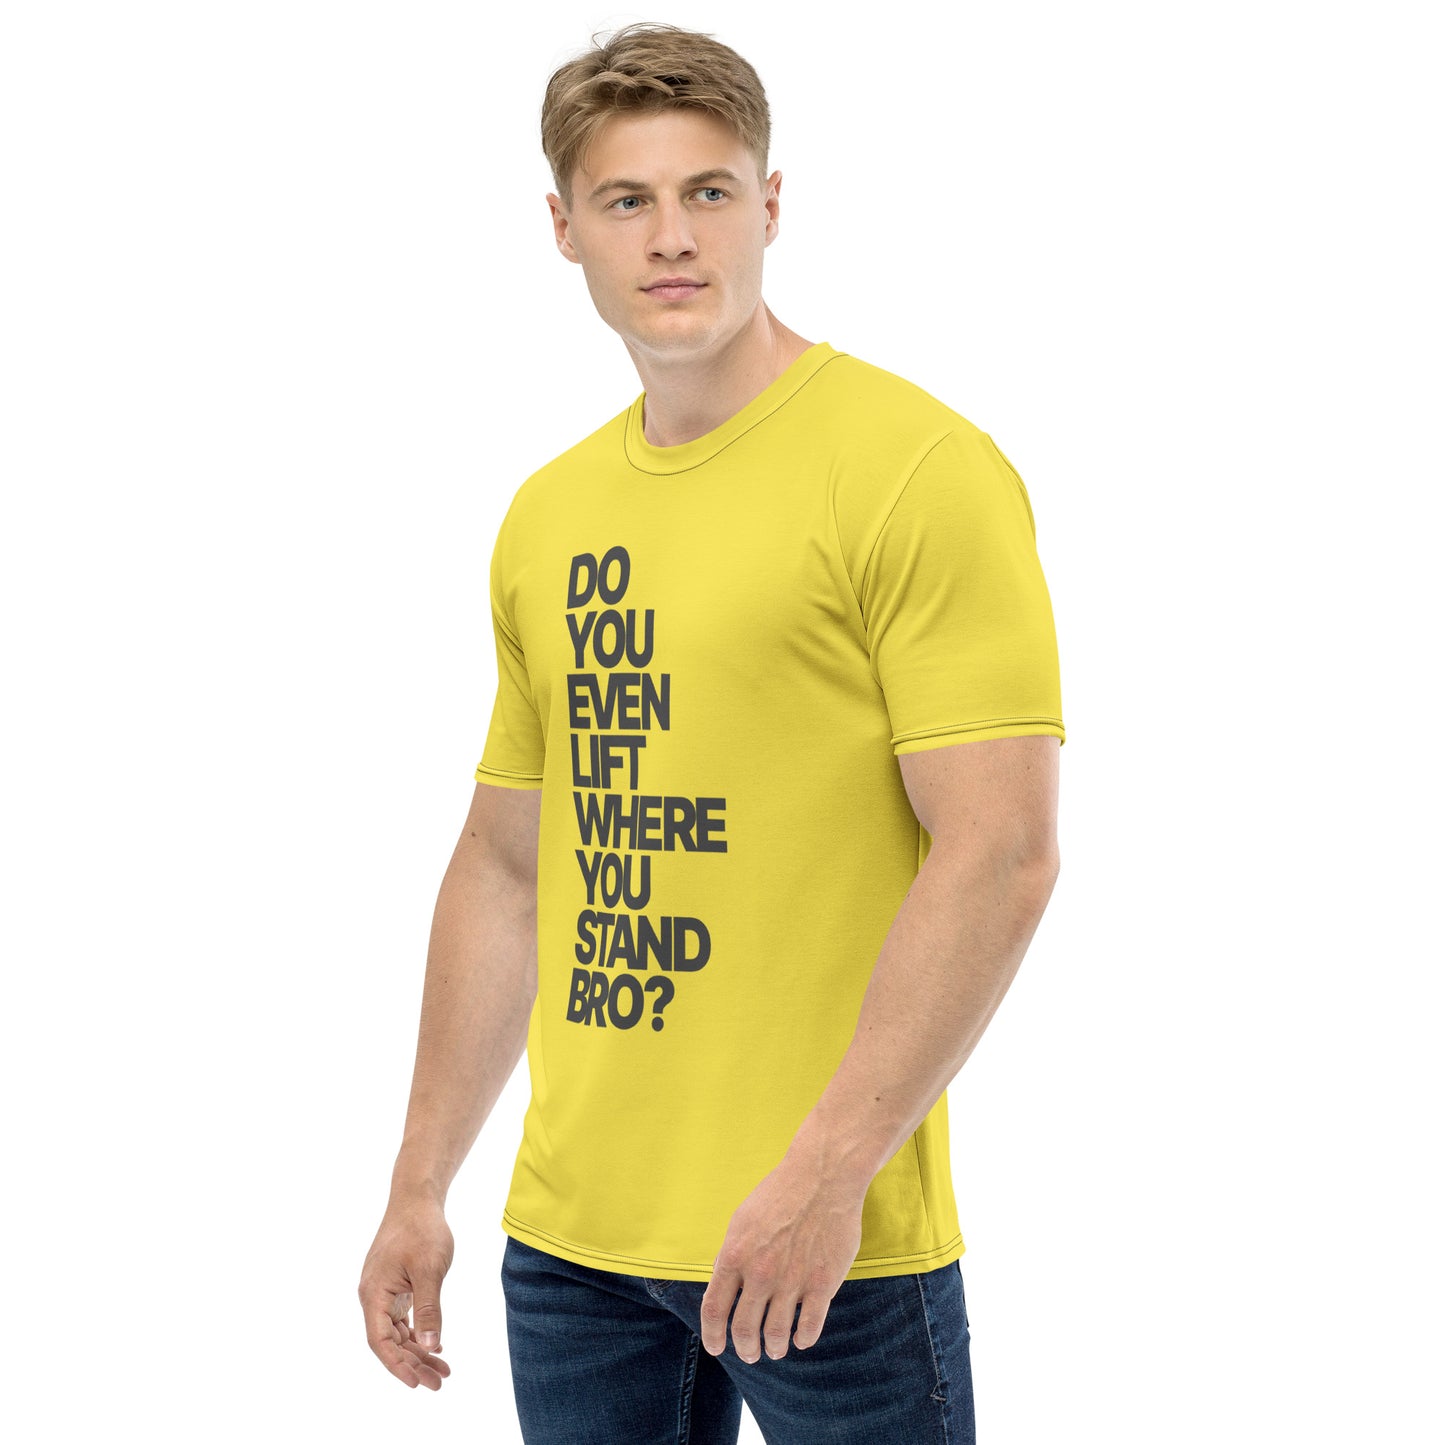 Men's Lift Where You Stand Athletic Shirt